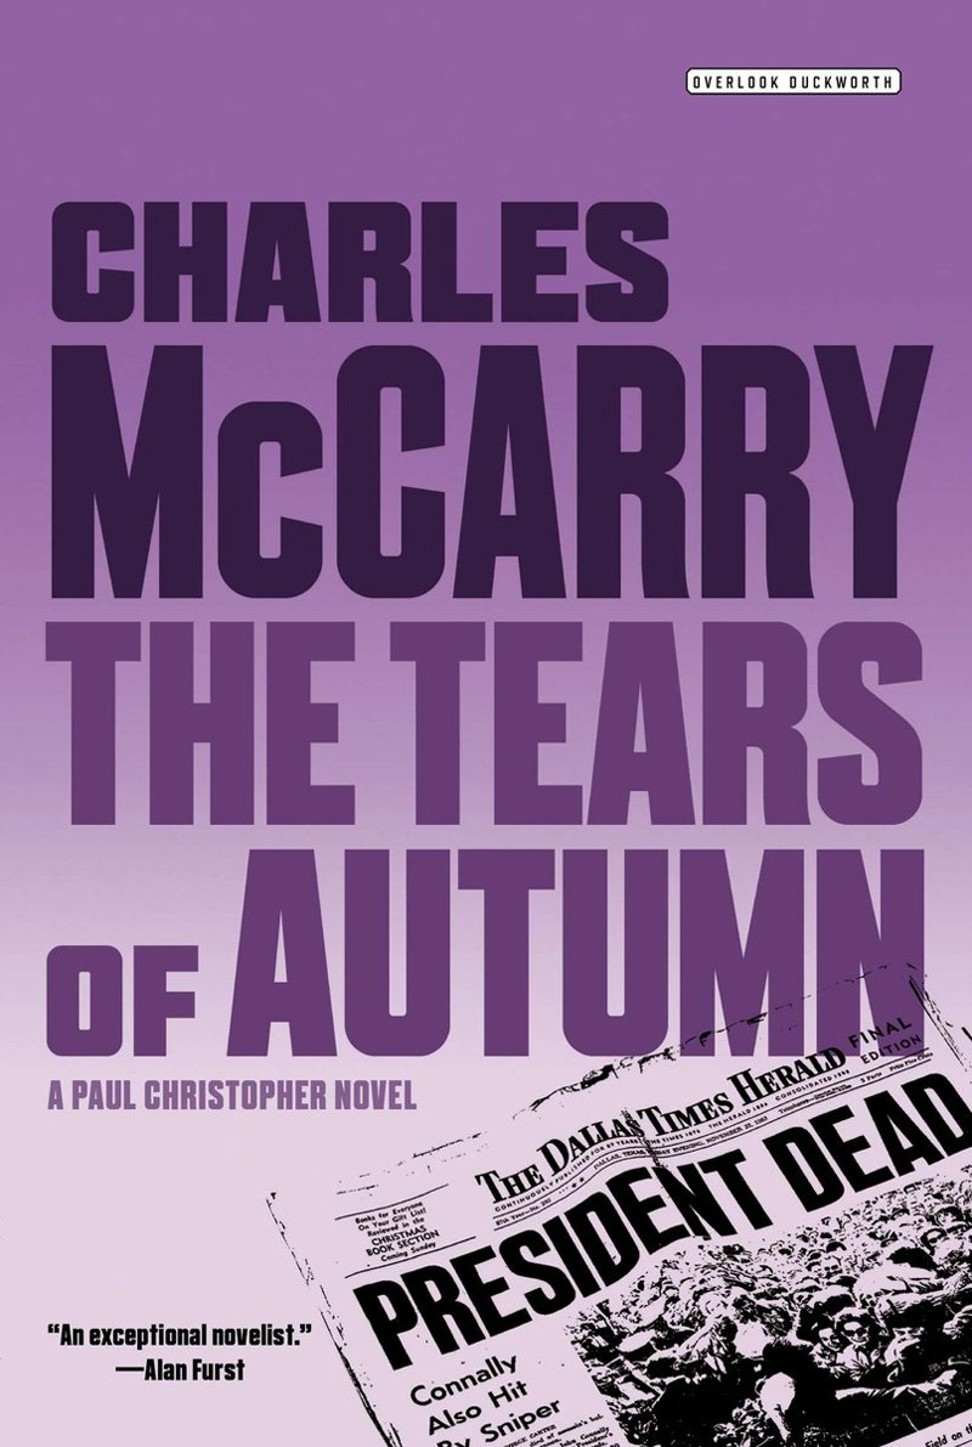 The cover of Tears of Autumn, whose author suggested South Vietnam was behind Kennedy’s killing.